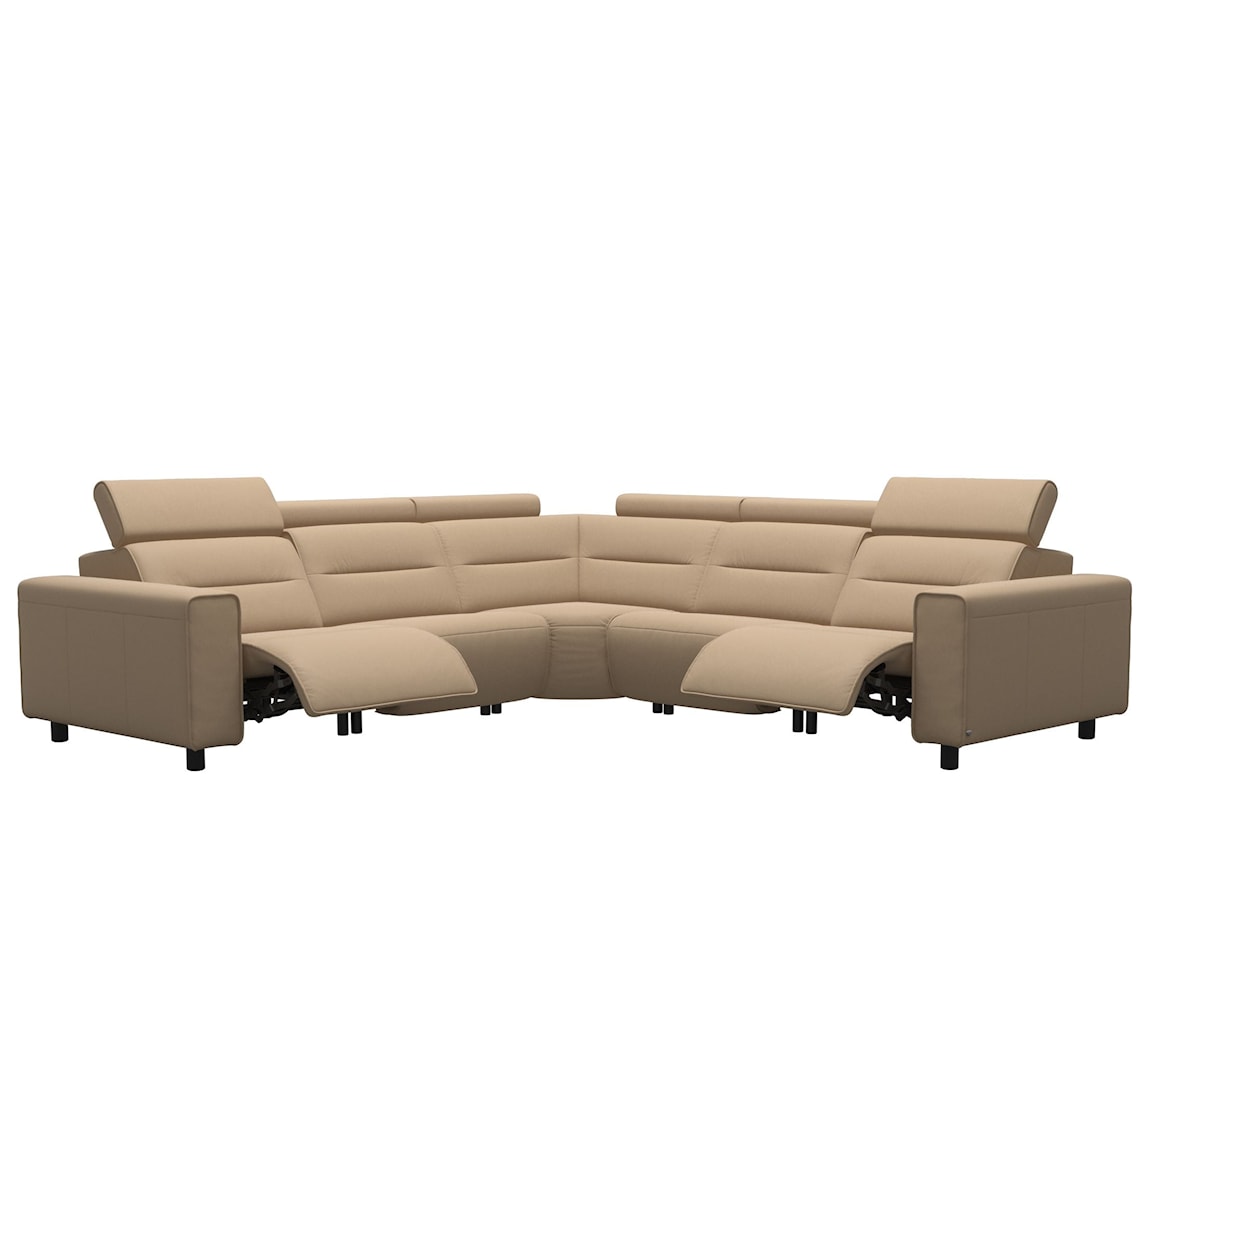 Stressless by Ekornes Emily 4-Seat Power Reclining Sofa with Wide Arms